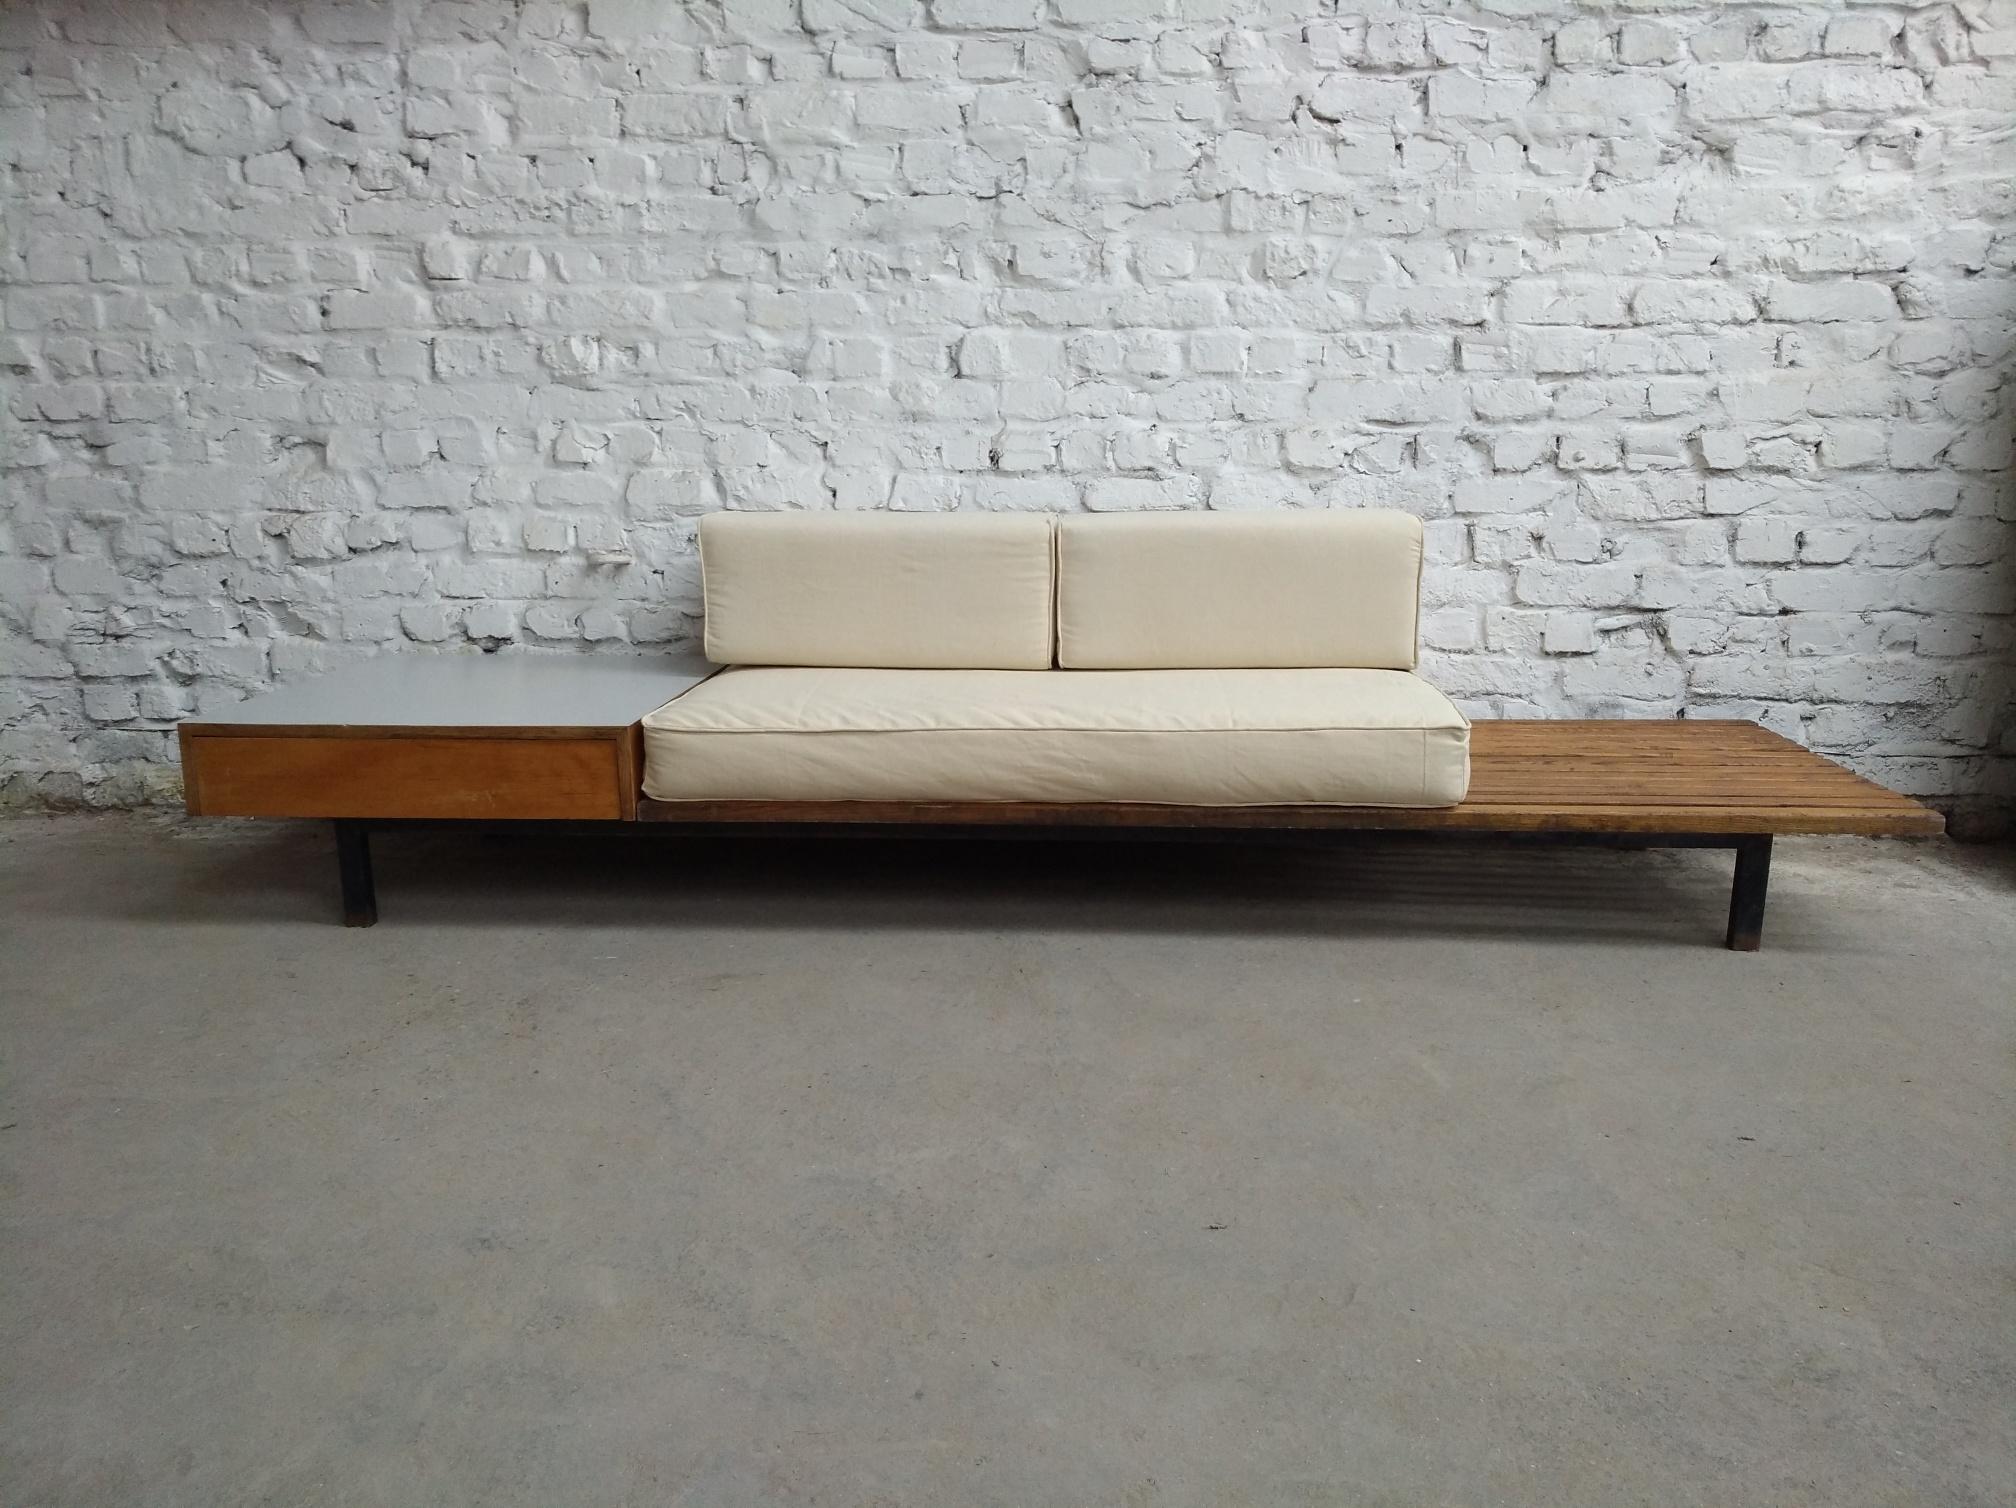 Fantastic patinated early slatted bench designed by Charlotte Perriand, 1959 France, for the homes of the Miferma mining company in the city of Cansado, Mauritania.
This bench comes with recently fabric upholstered foam cushions for a more